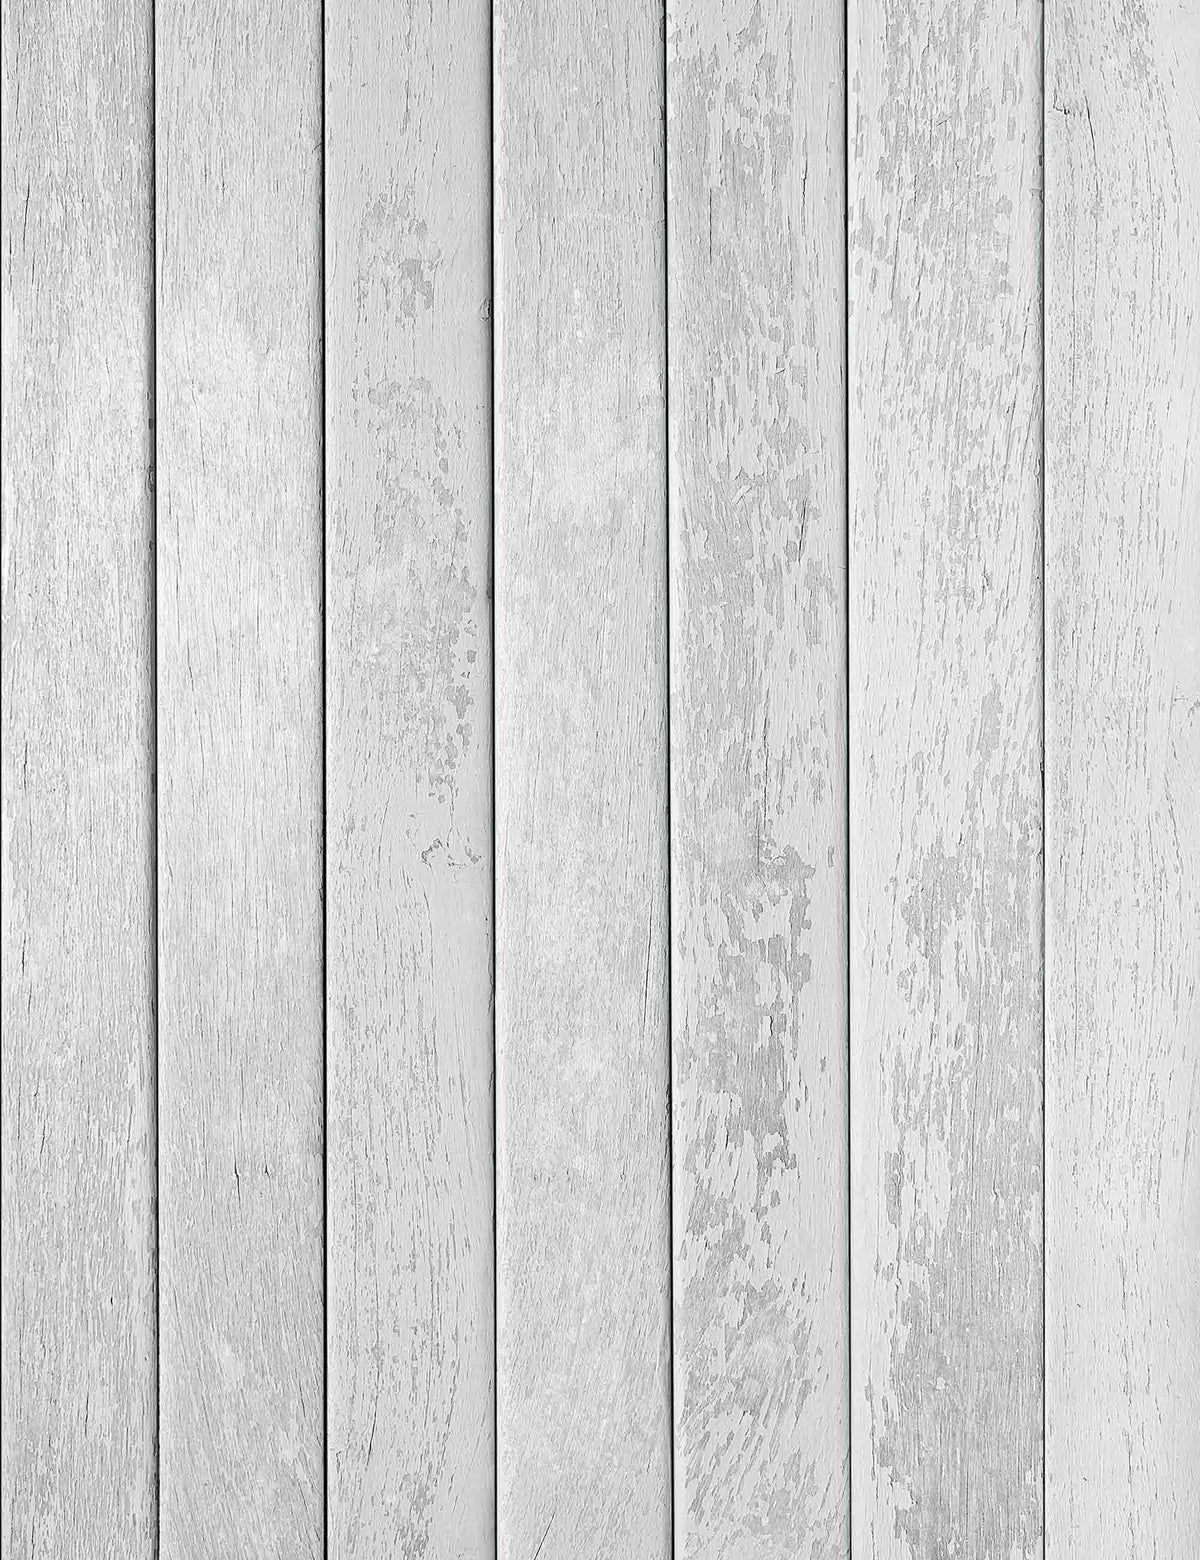 Old White Printed Wood Floor Texture Backdrop For Photography Shopbackdrop